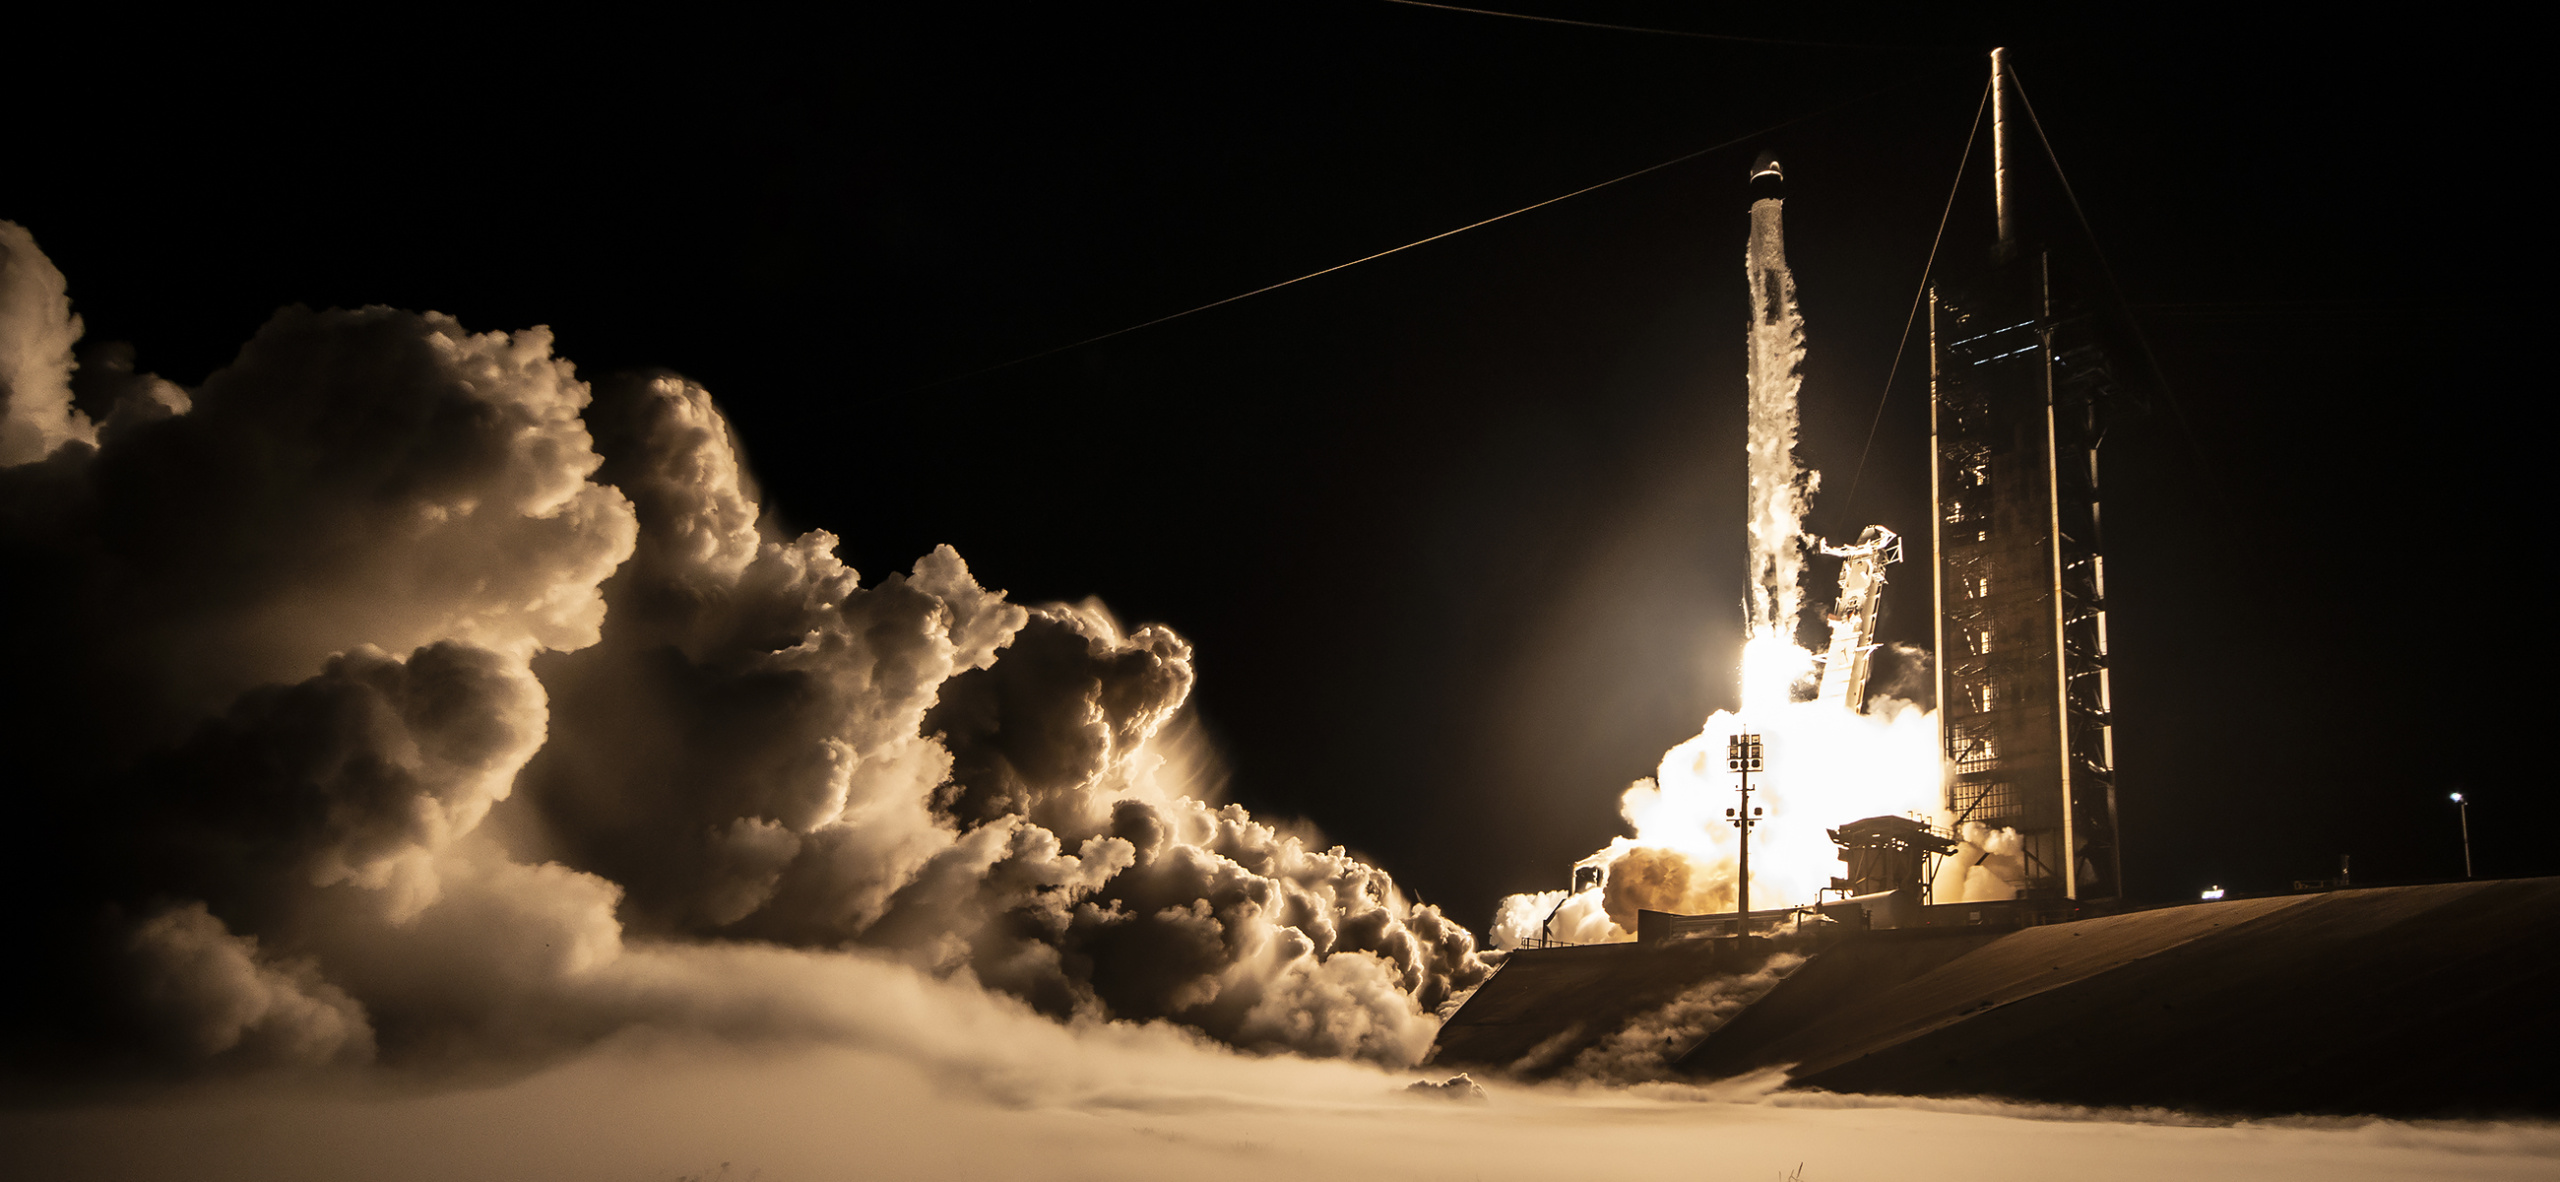 SpaceX launched three Falcon 9s in less than a day, and two of them in a record time of 1 hour 51 minutes.